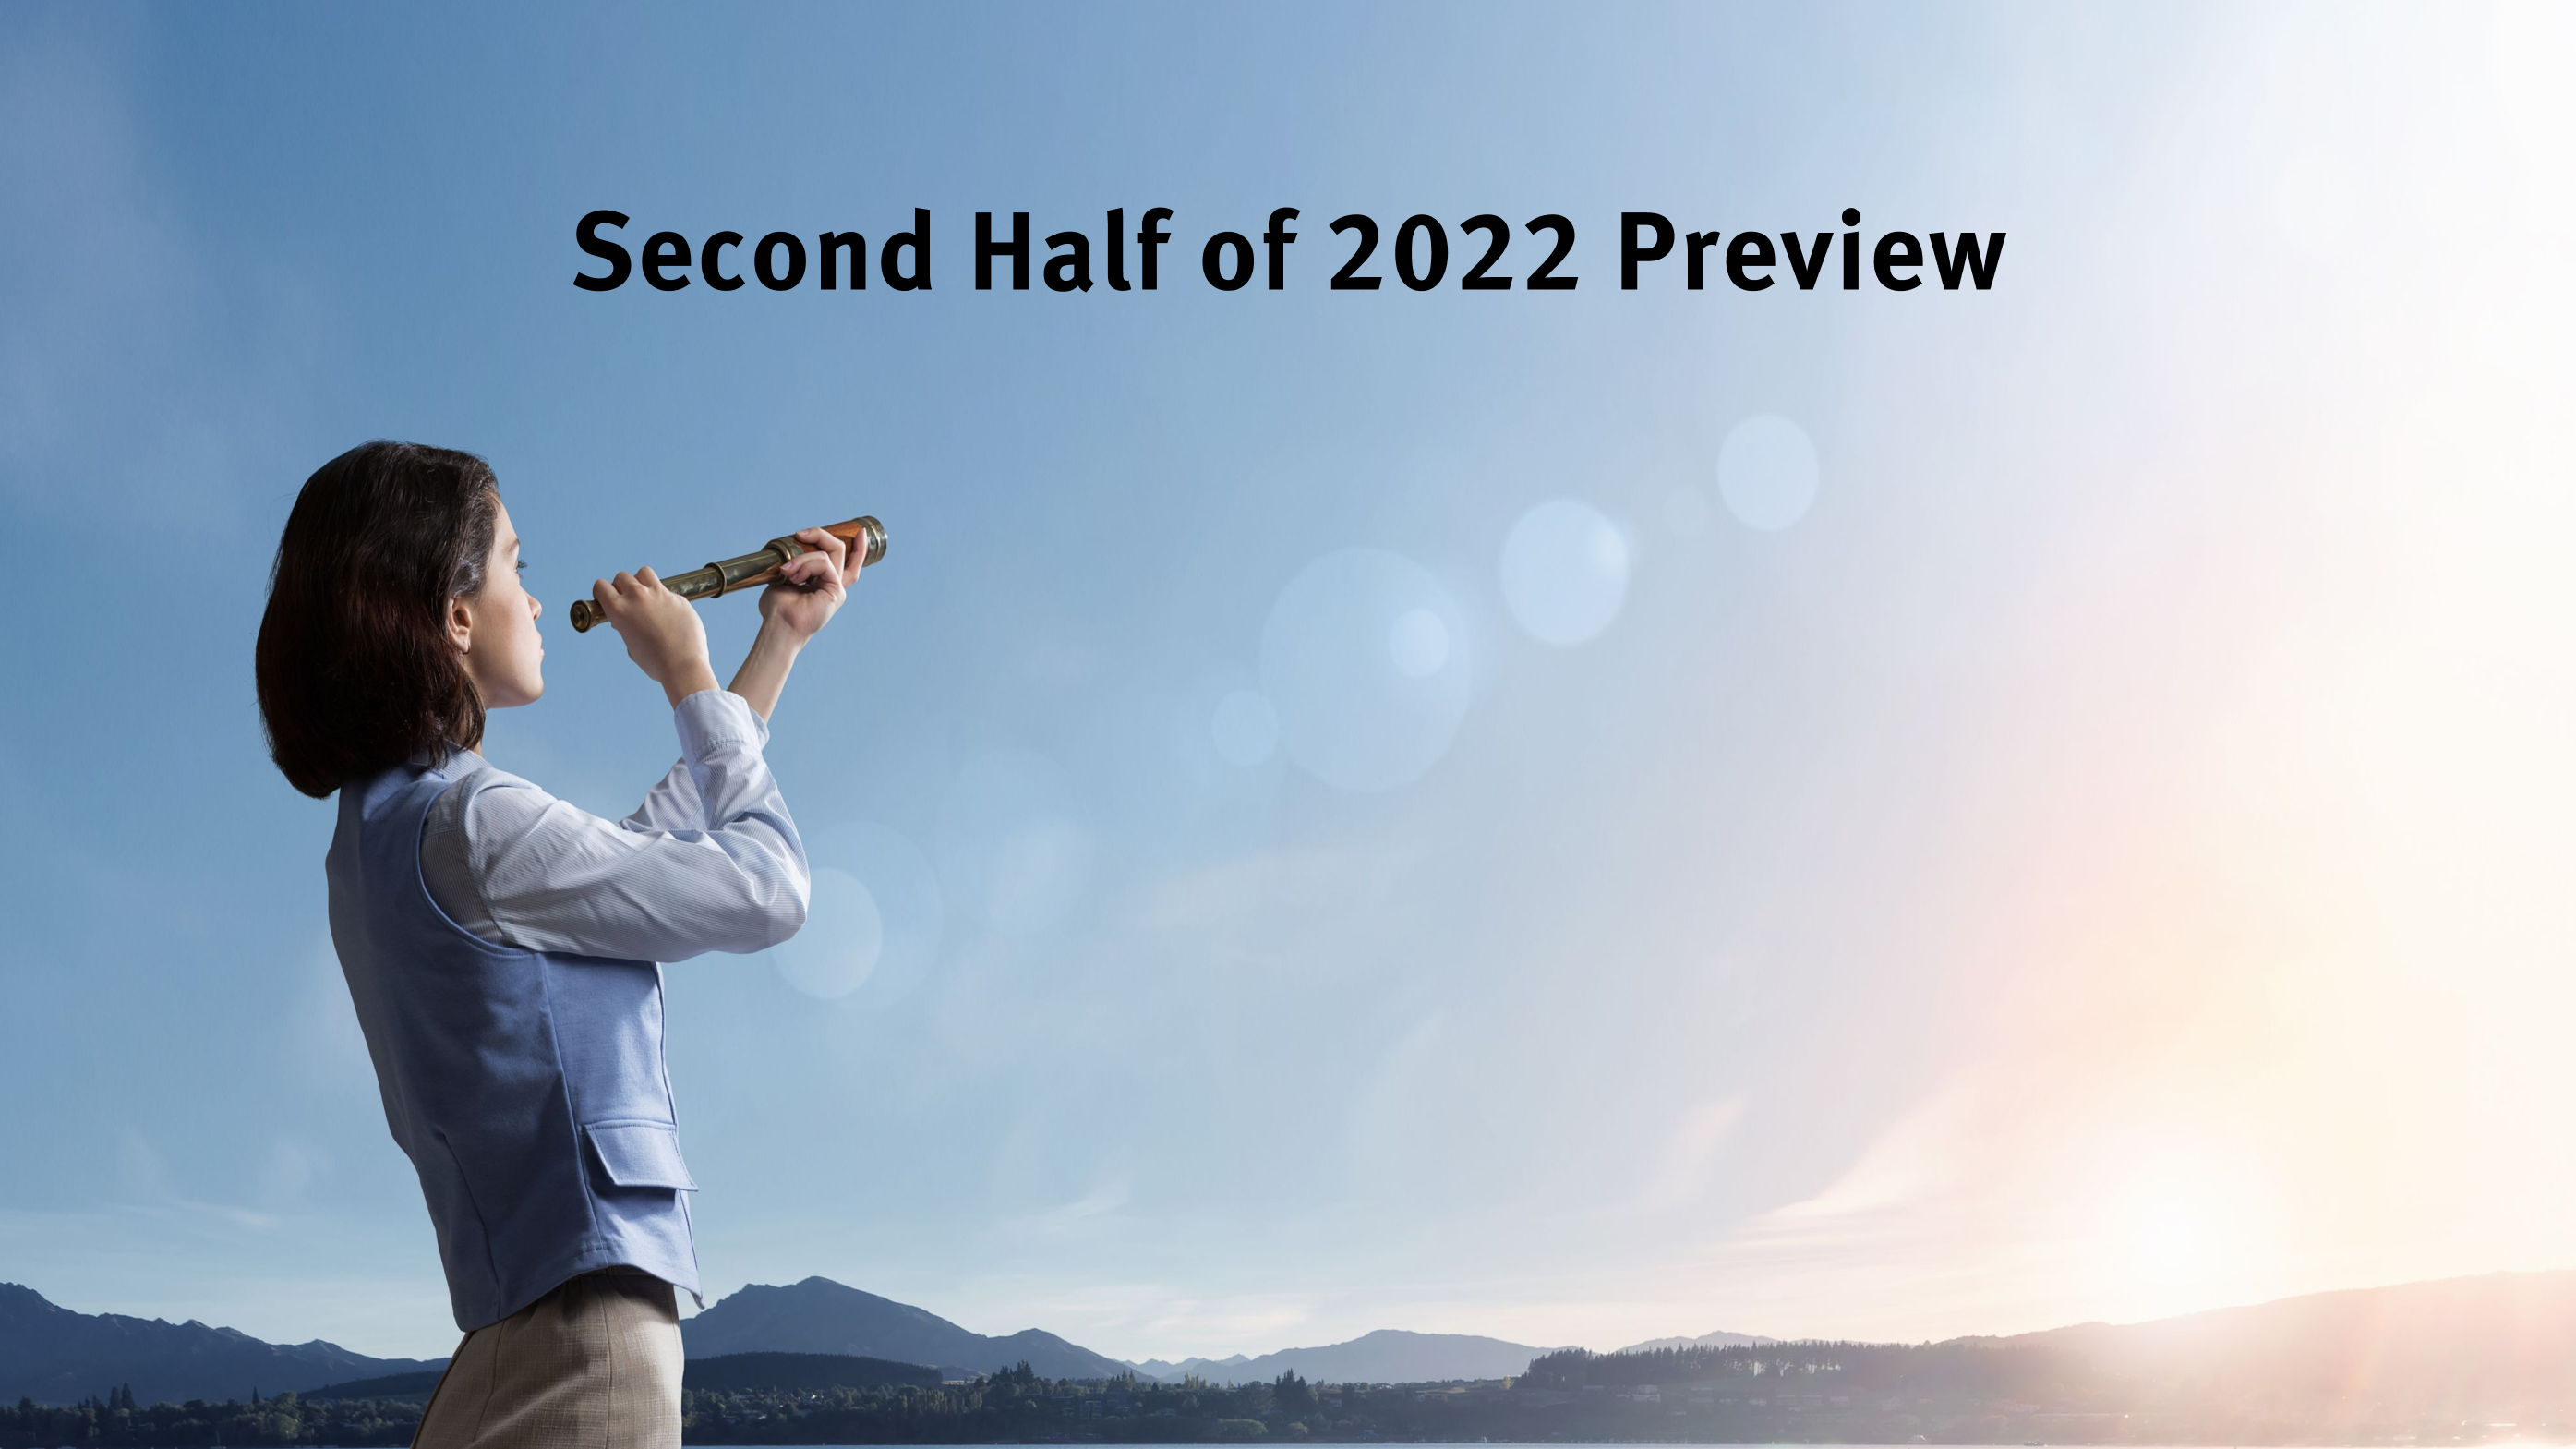 Second Half of 2022 Preview